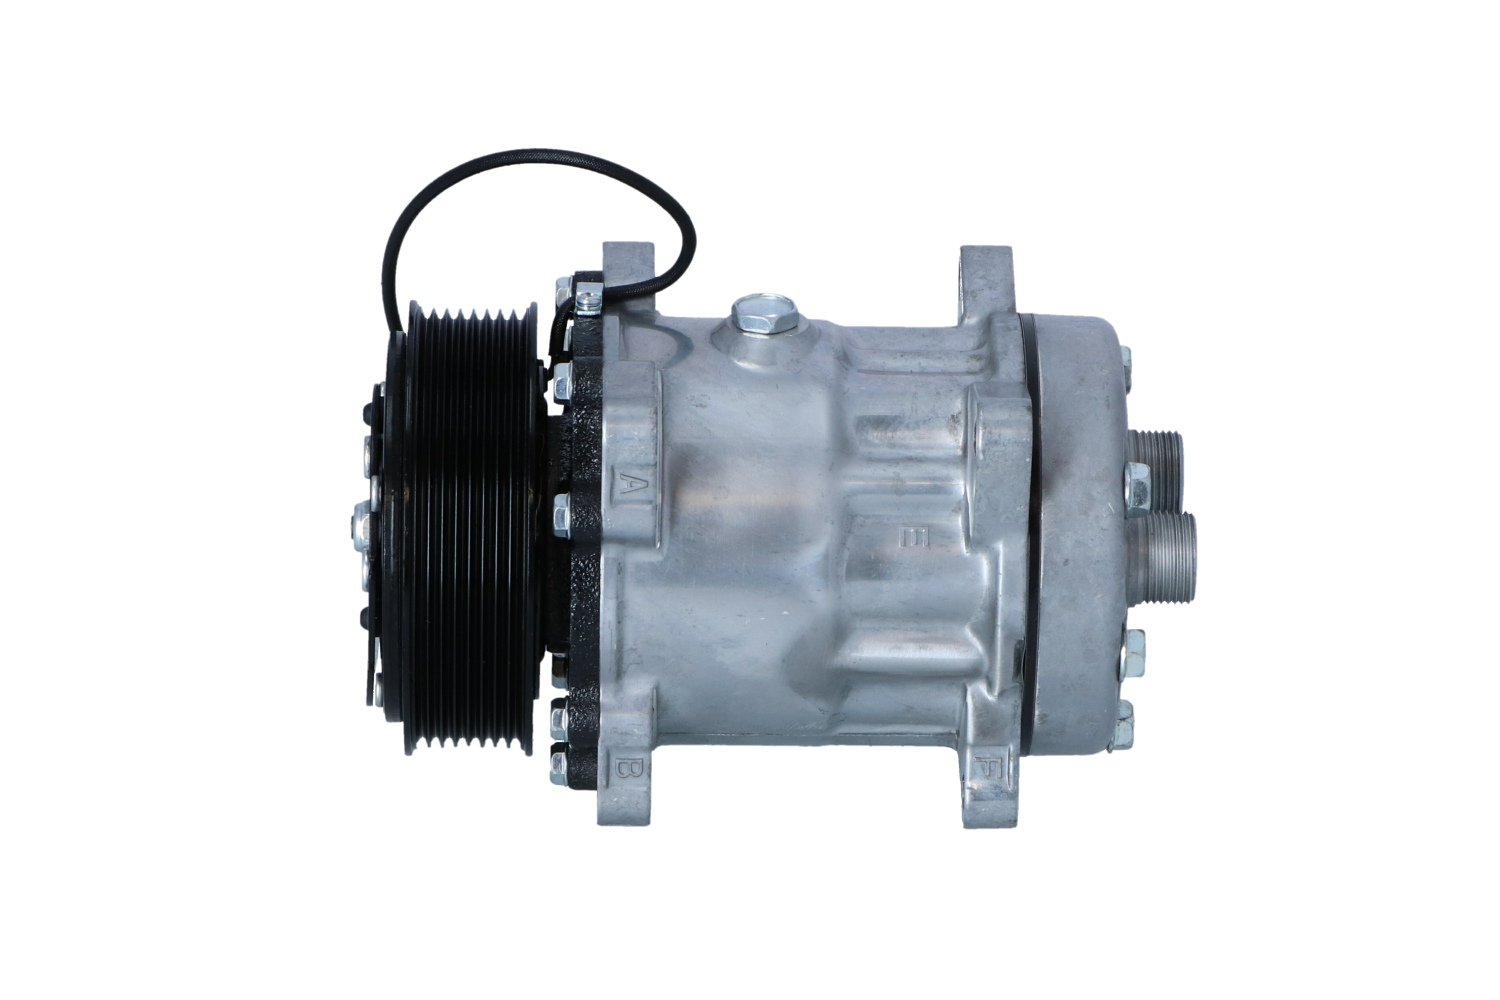 NRF 32874 Air conditioning compressor SD7H15-7822, 12V, PAG 46, with PAG compressor oil, with seal ring